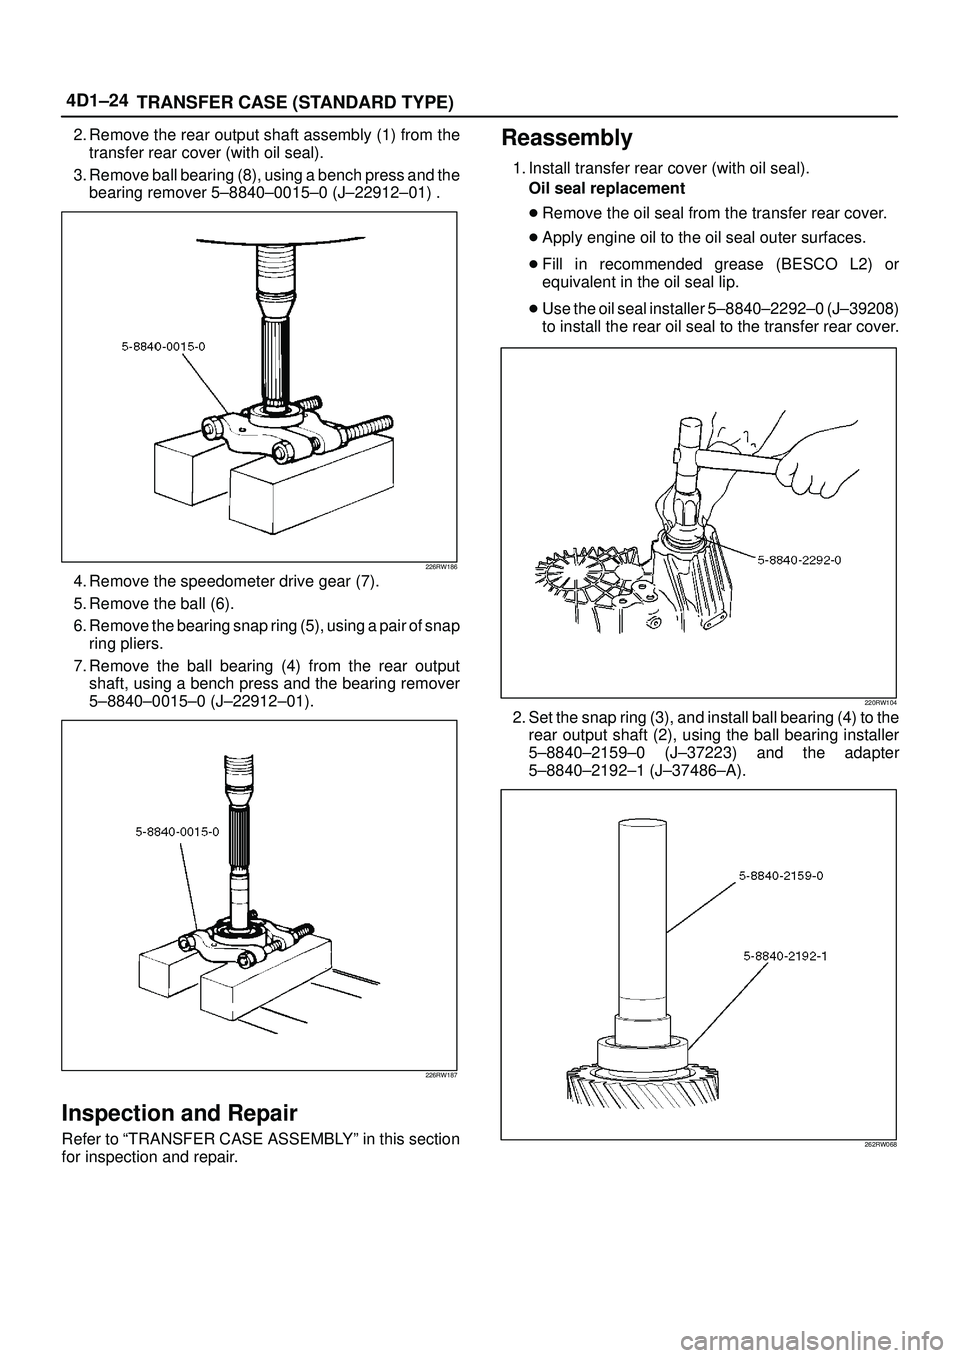 ISUZU TROOPER 1998  Service Repair Manual 4D1±24
TRANSFER CASE (STANDARD TYPE)
2. Remove the rear output shaft assembly (1) from the
transfer rear cover (with oil seal).
3. Remove ball bearing (8), using a bench press and the
bearing remover